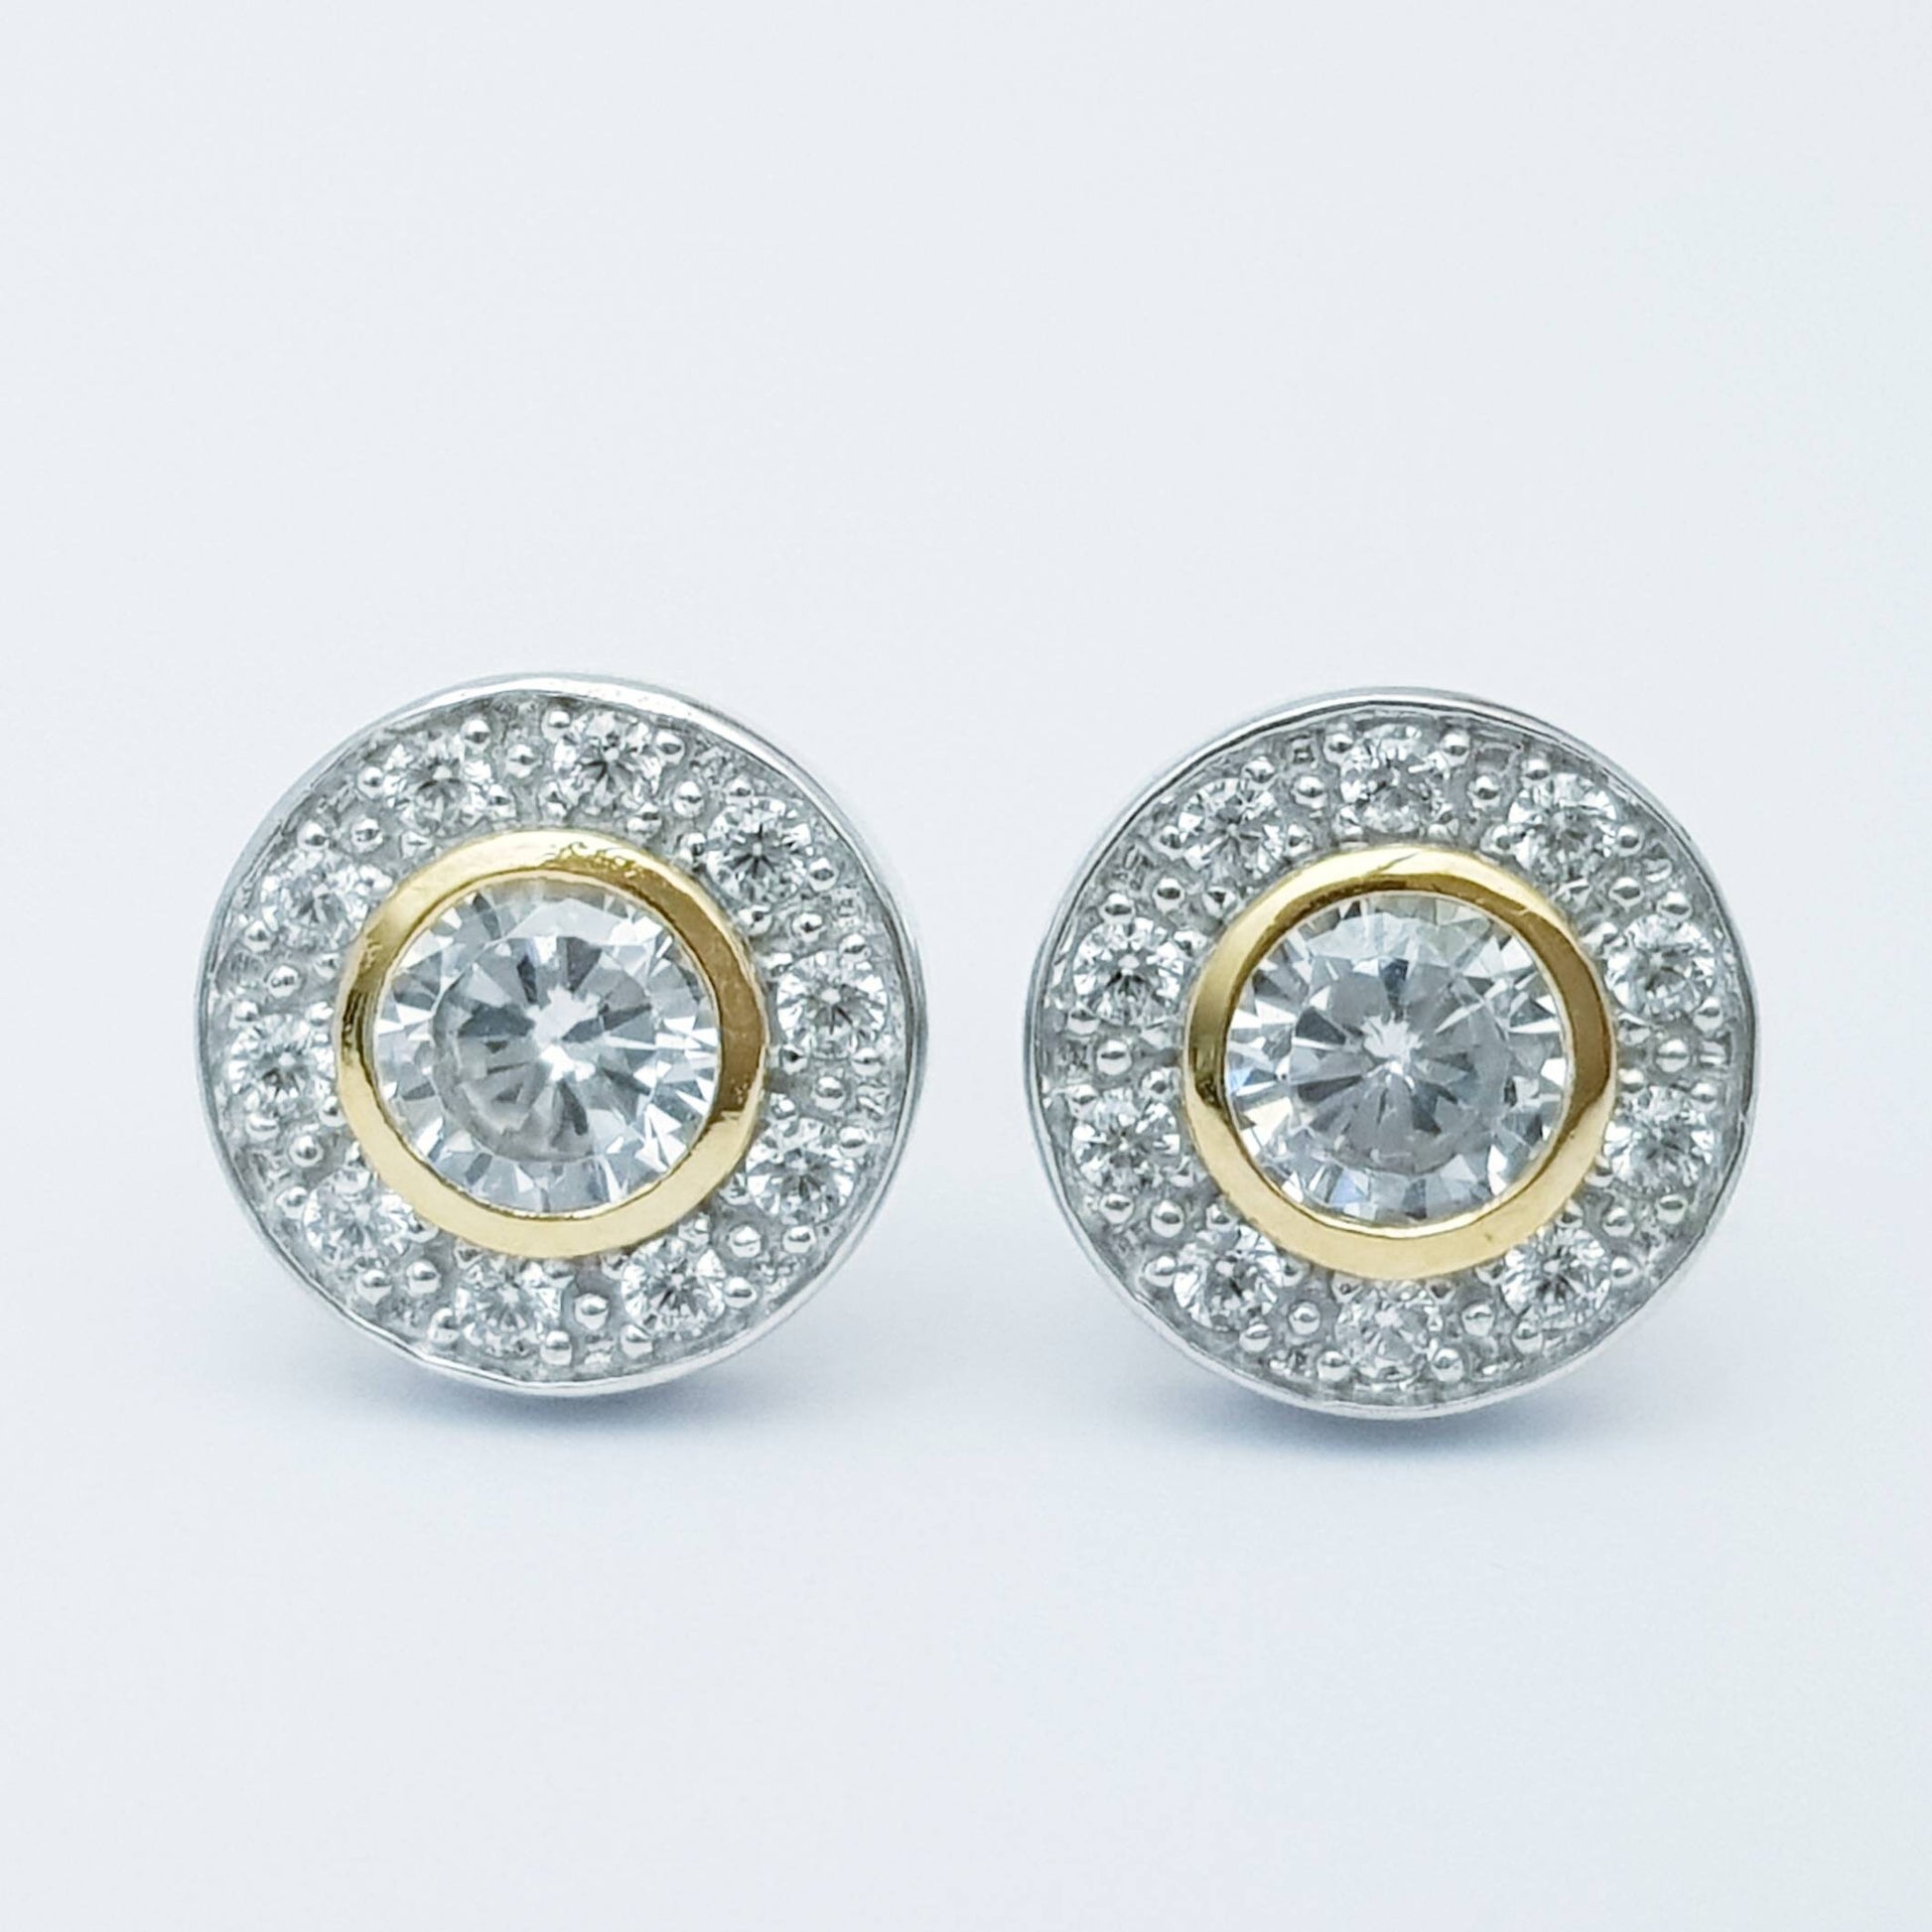 Gold plated sterling silver stud earrings with cubic zirconia, elegant round silver earrings, small stud earrings